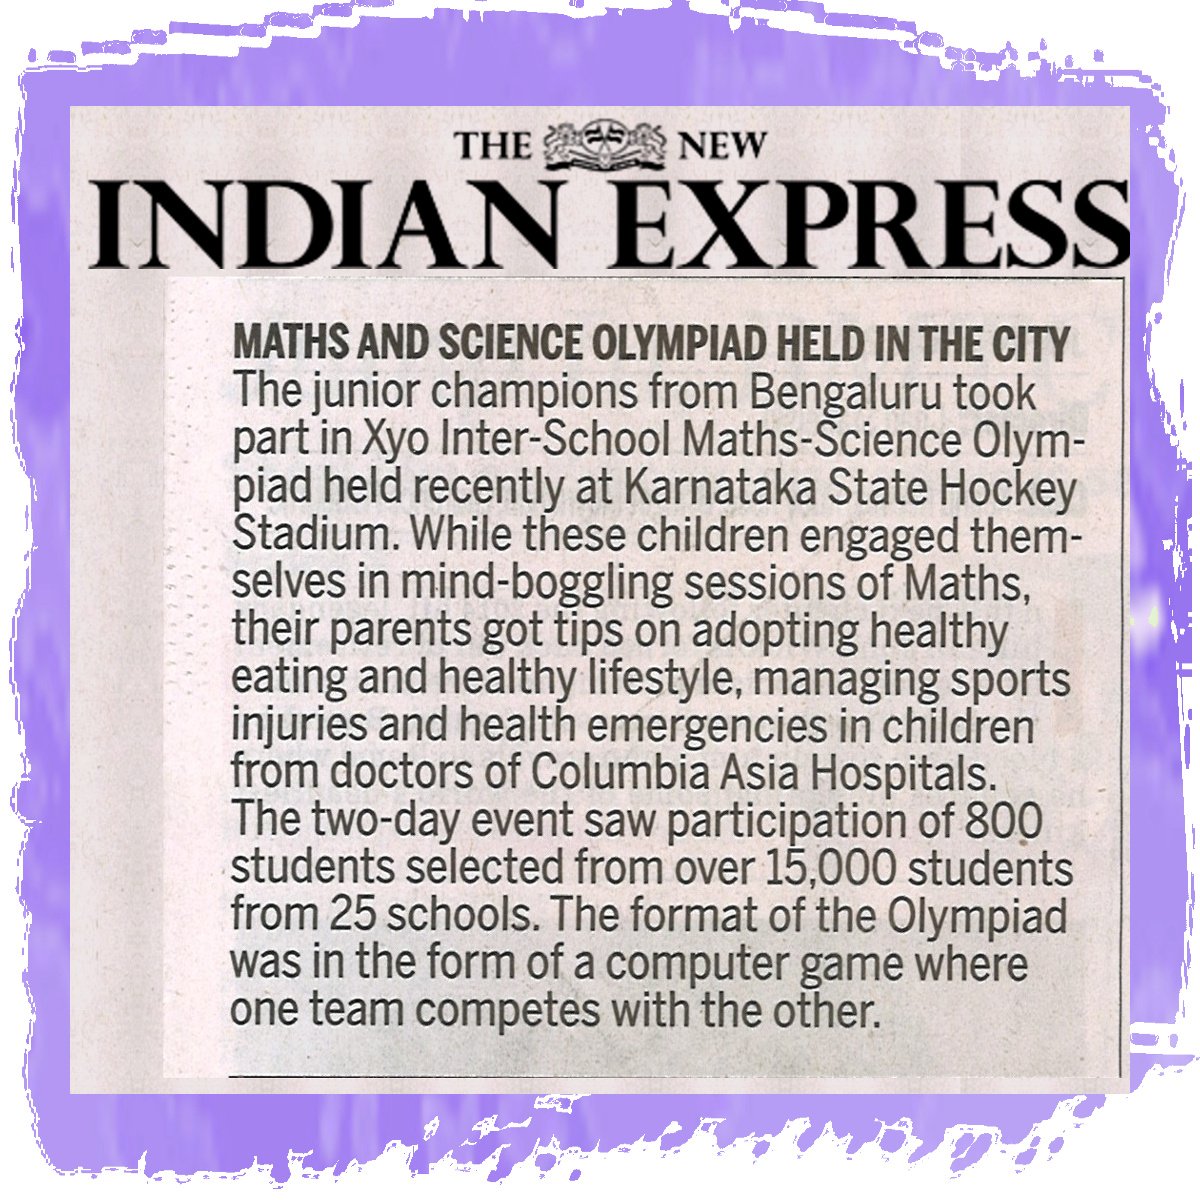 Xyo Maths in Indian Express